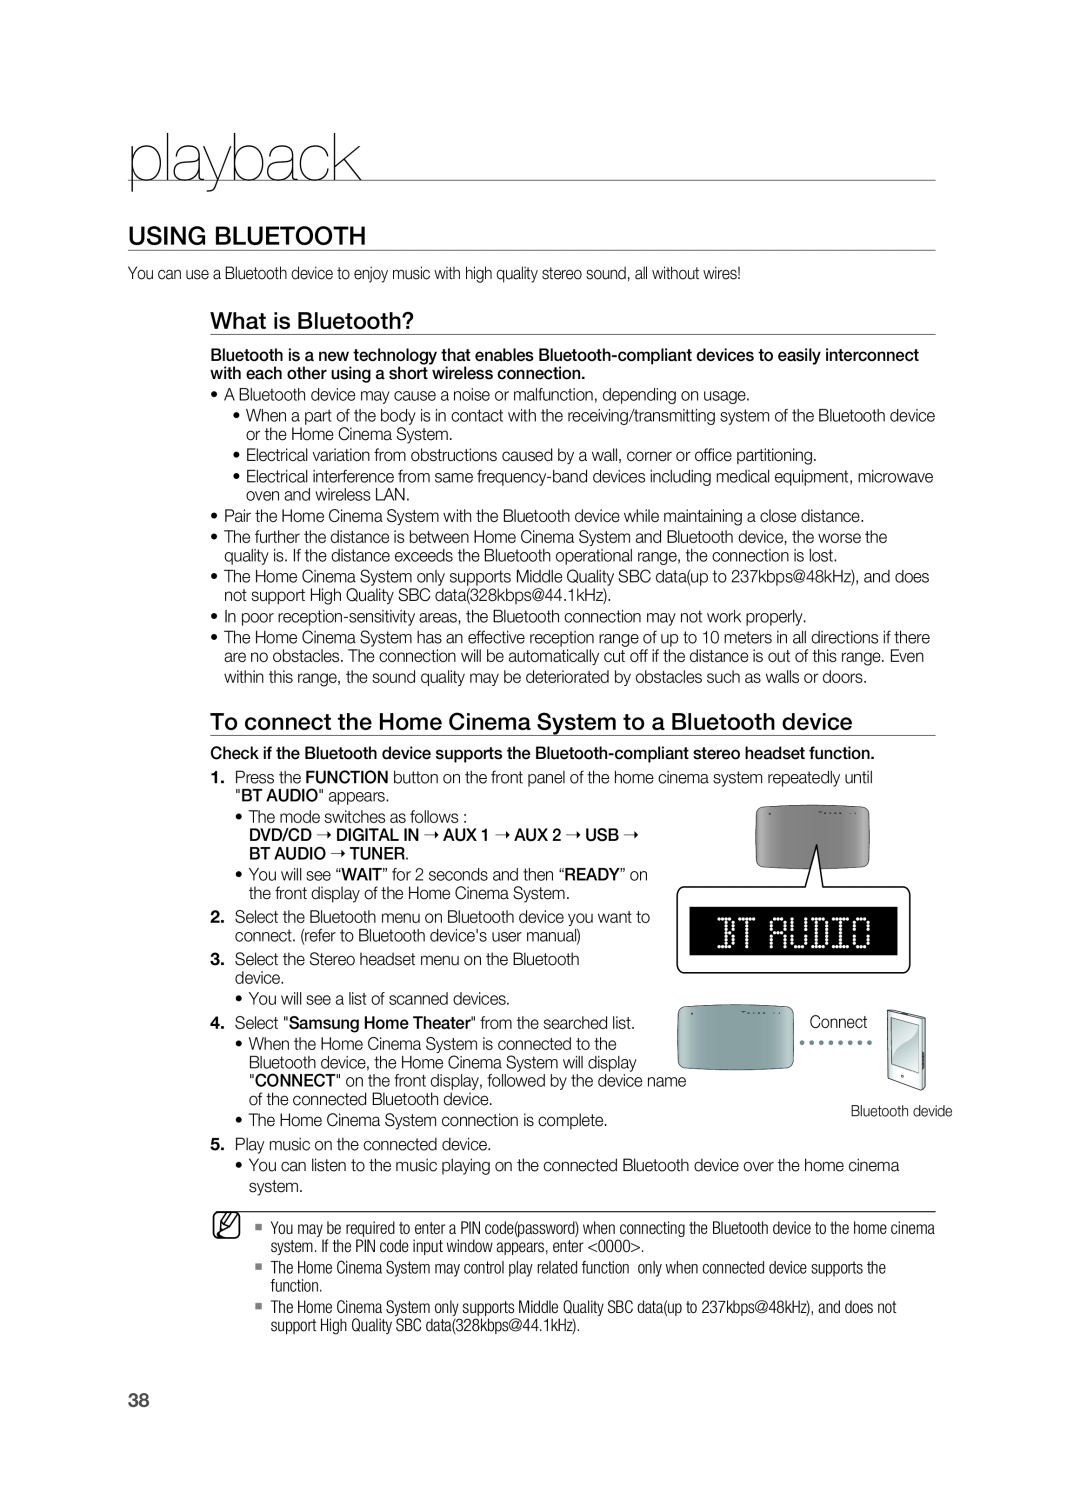 Samsung HT-X710 user manual Using Bluetooth, What is Bluetooth?, playback 